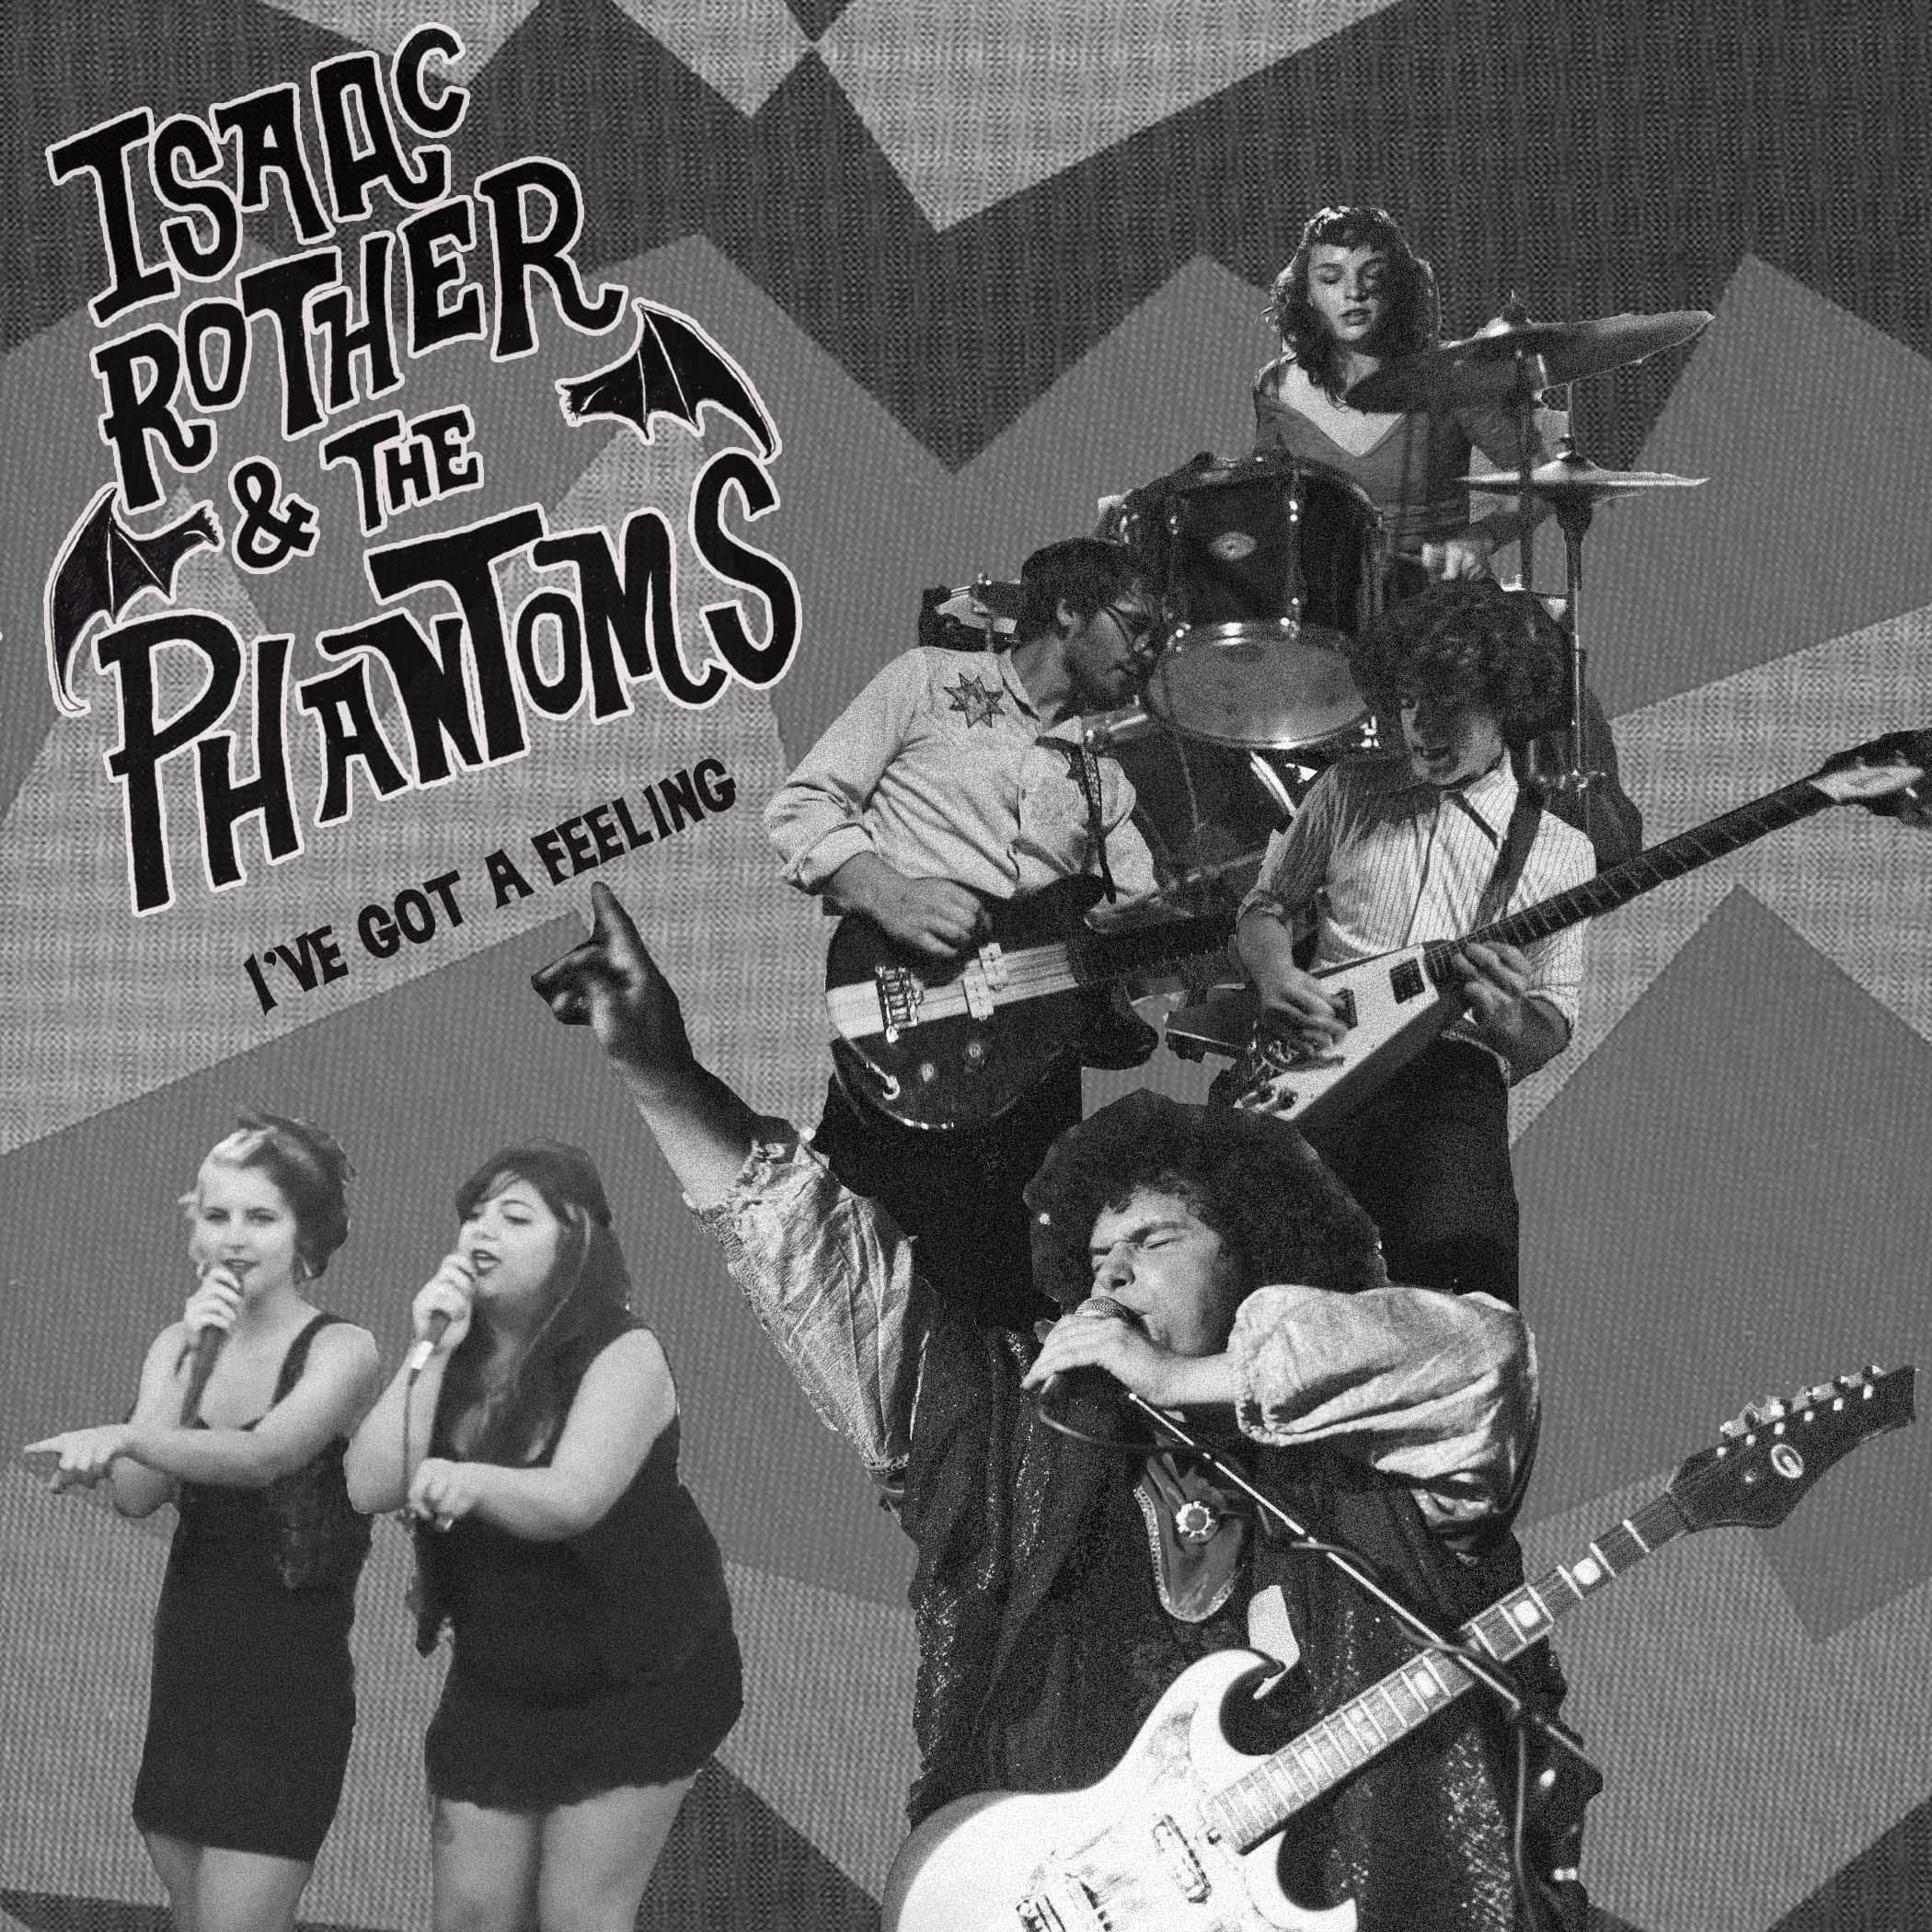 Isaac Rother & The Phantoms- I've Got a Feeling 7"  ~~  GREEN MARBLE VINYL + DOWNLOAD